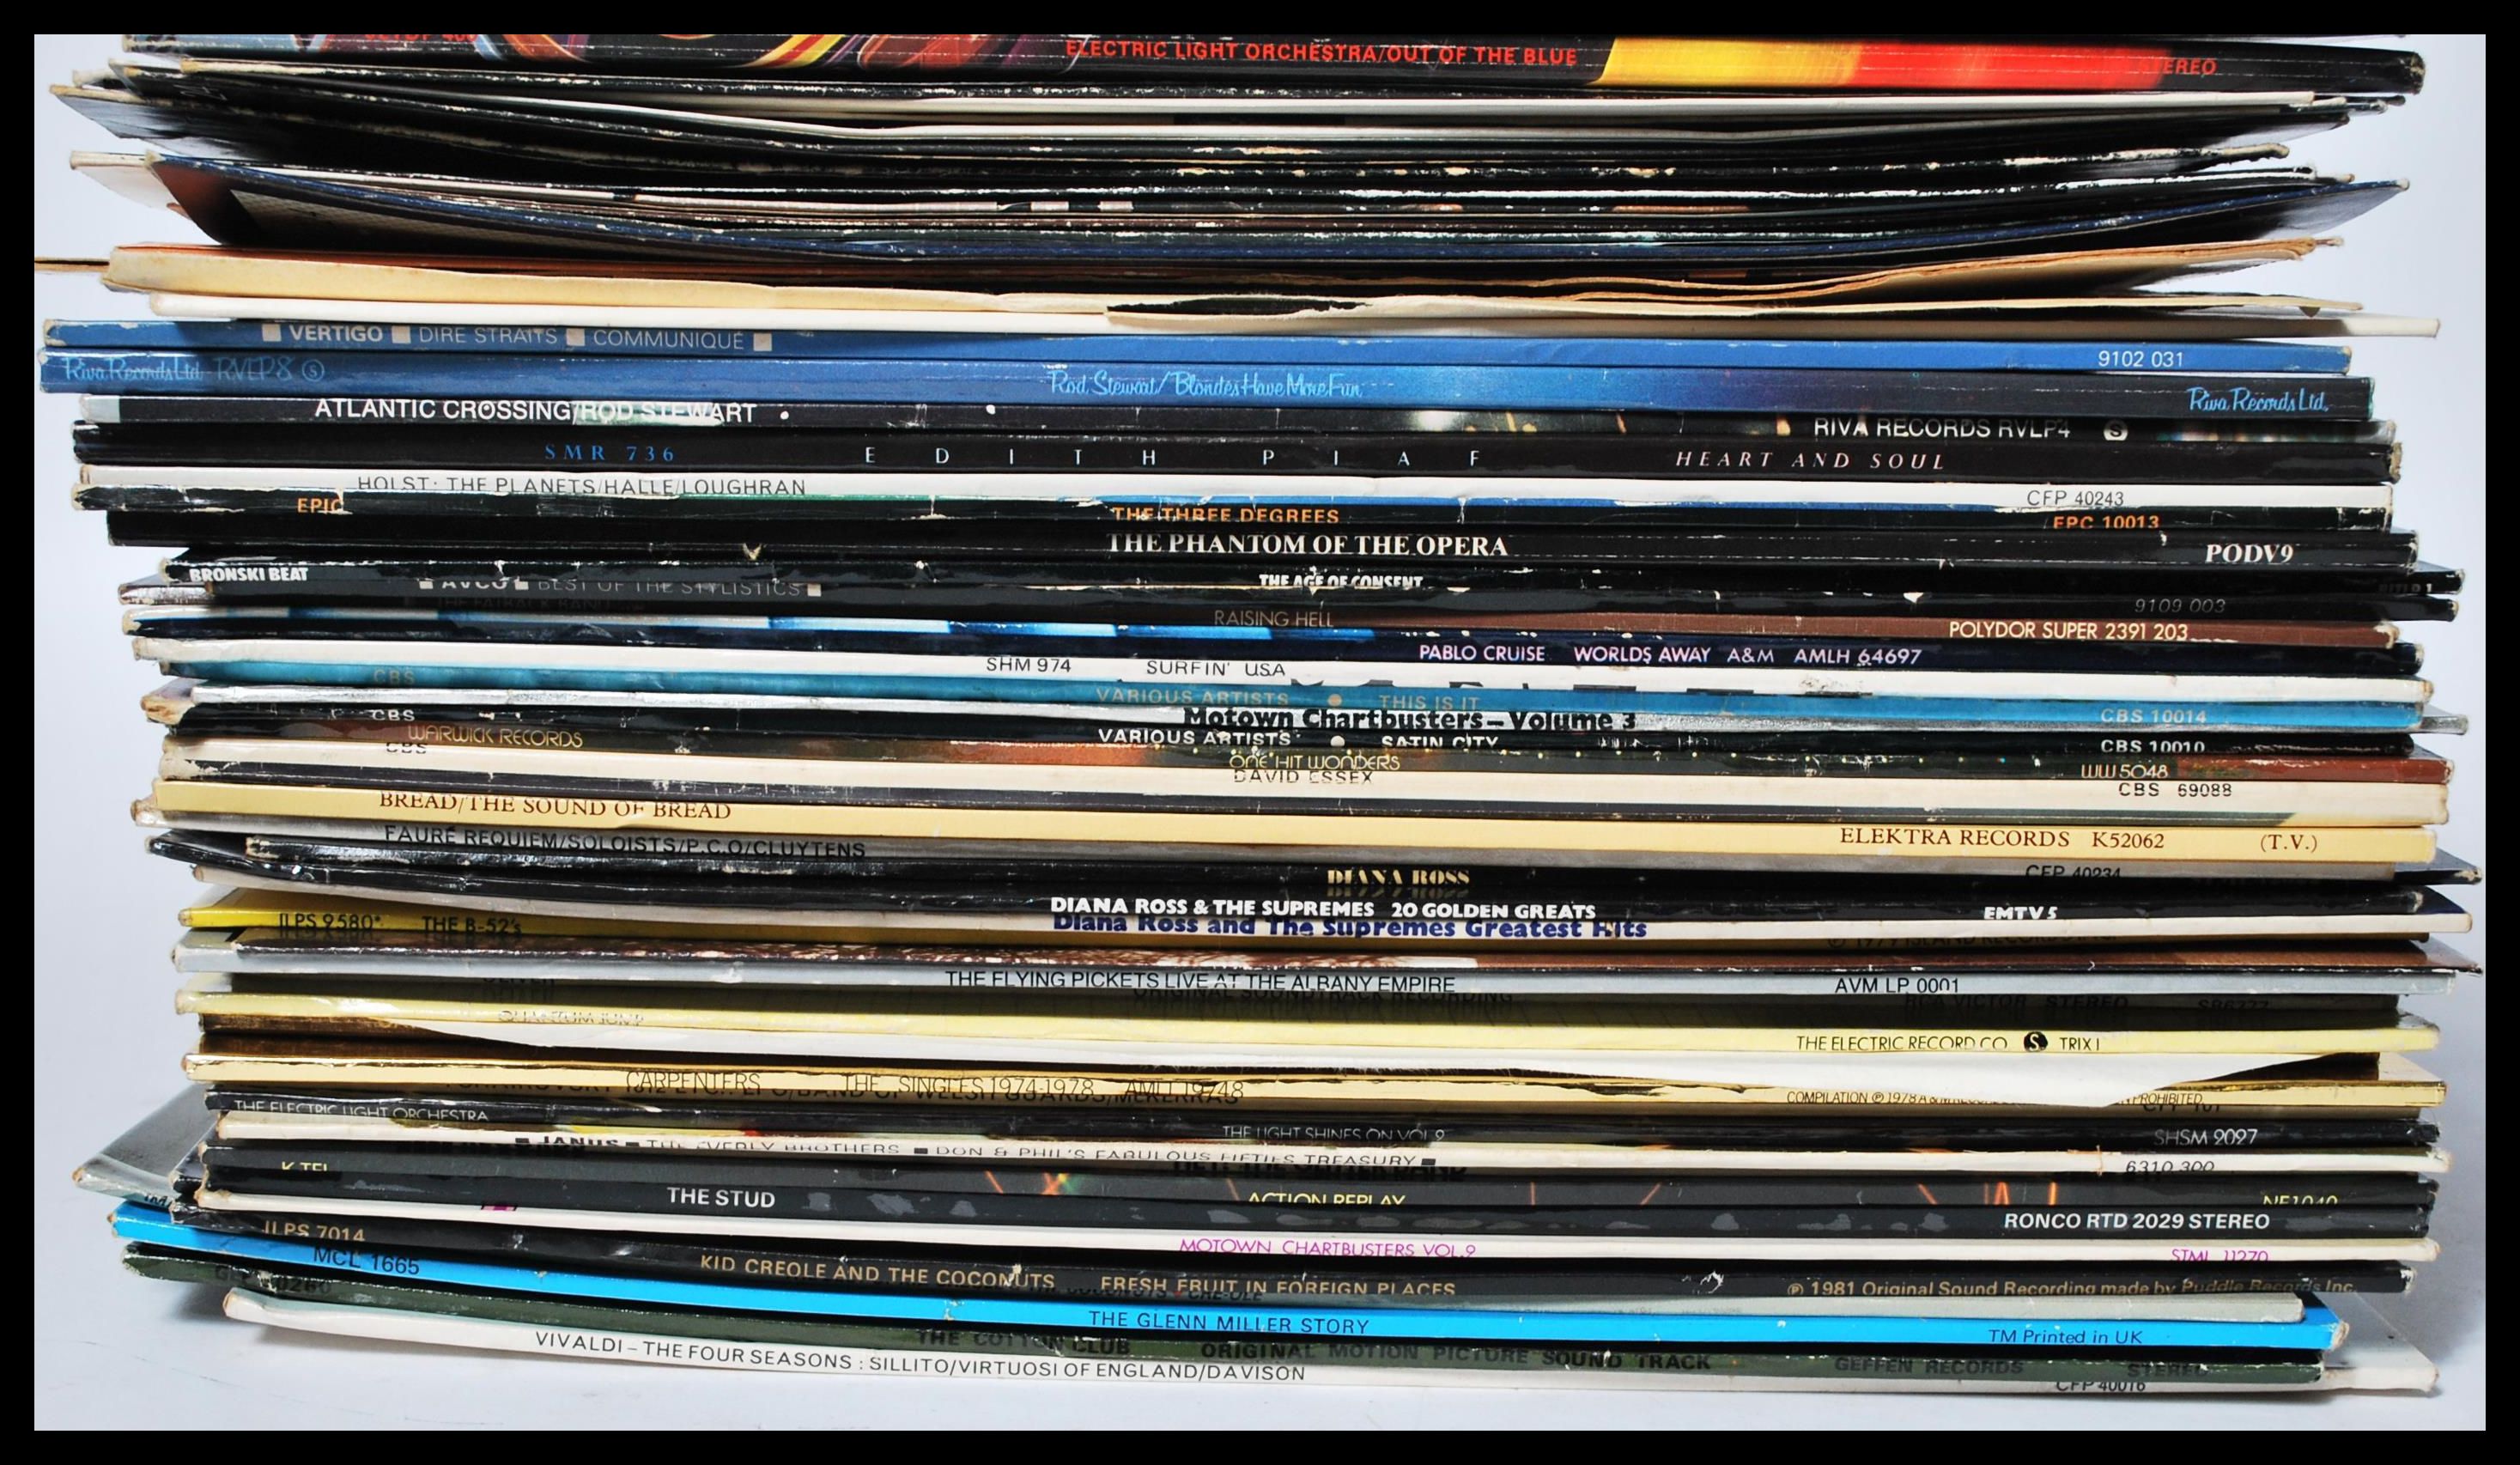 Vinyl Records - A collection of vinyl long play LP and 12" singles featuring various artists to - Image 4 of 4